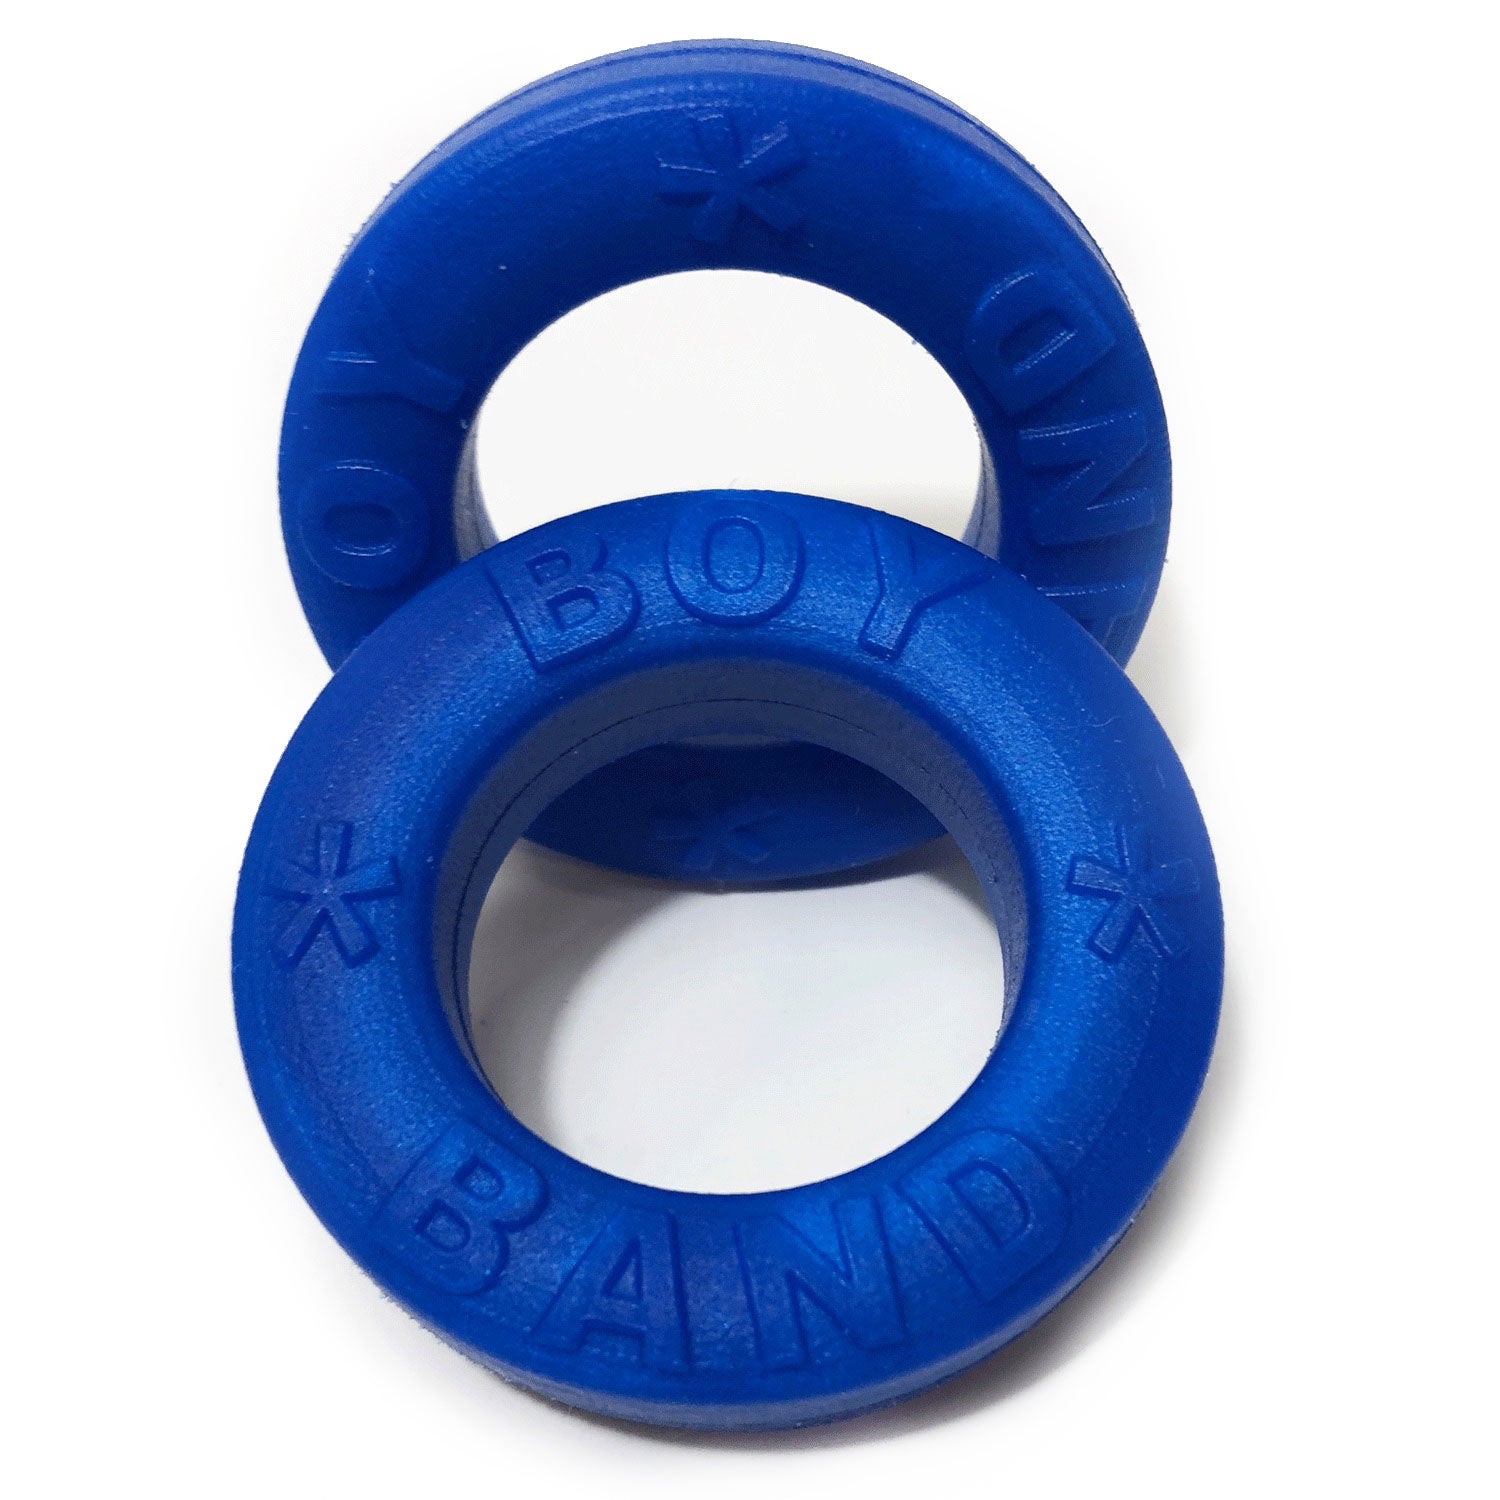 Bright Cobalt Blue Silicone Cockring 